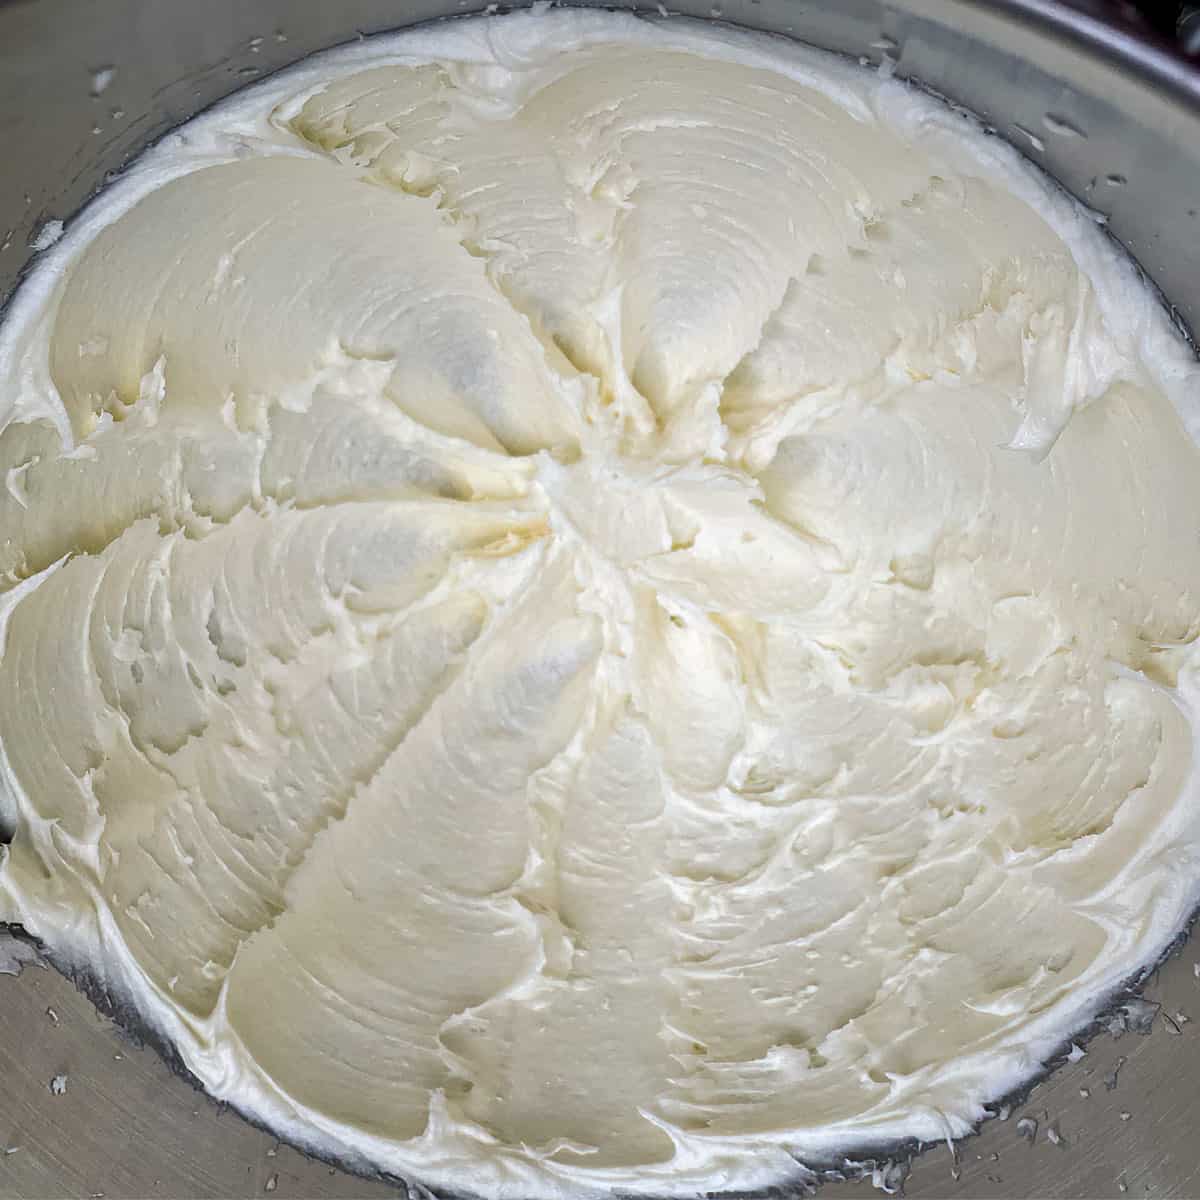 After being mixed for 3 minutes, how creamy the butter, cream cheese and the sugar look in the mixer bowl.